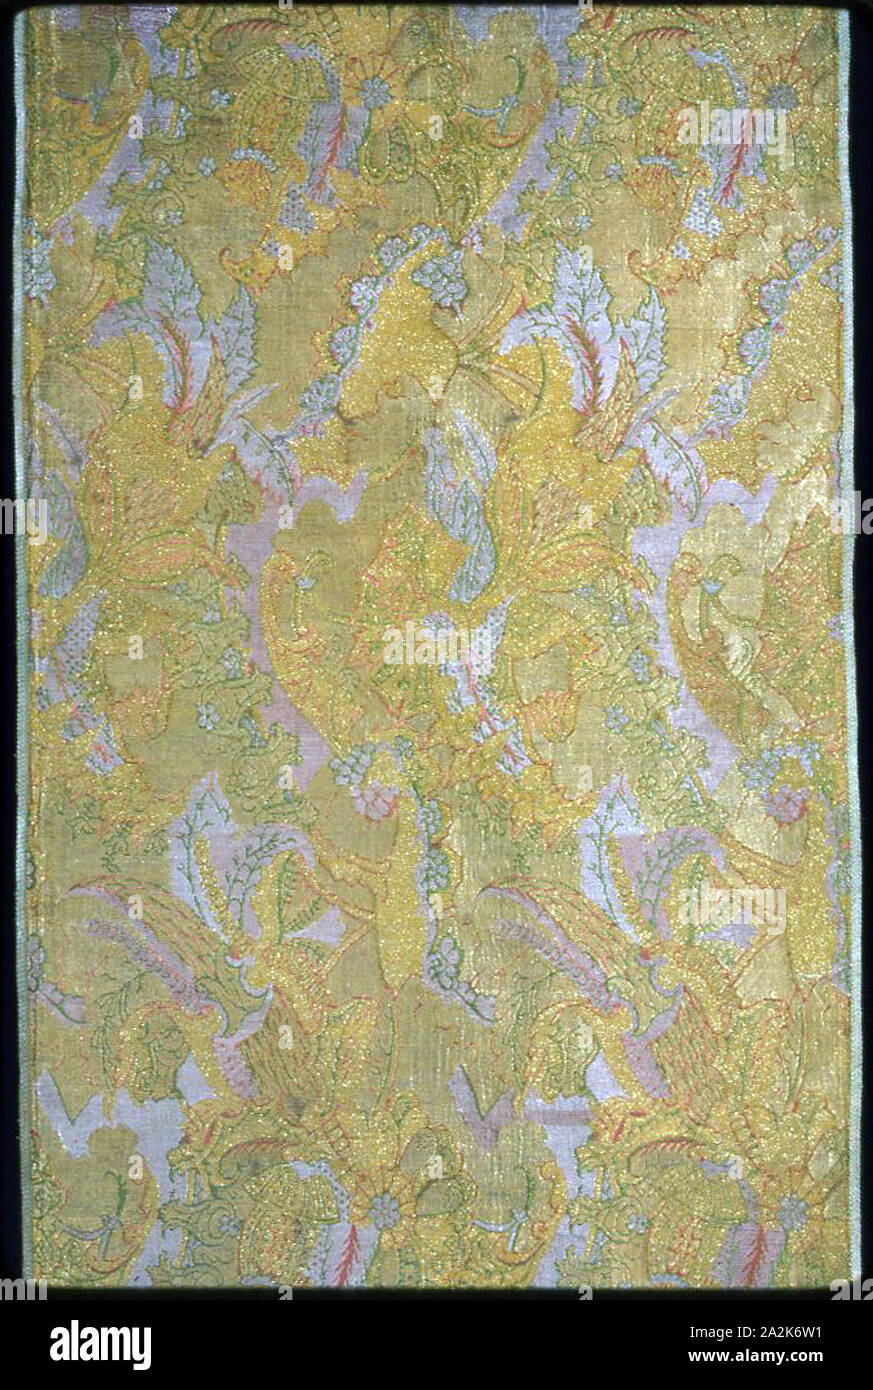 Panel (Dress Fabric), c. 1718/19, France, Silk, gilt-metal-strip-wrapped silk, warp-float faced 7:1 satin weave with secondary binding warps tying supplementary patterning wefts, supplementary brocading wefts, and self-patterning ground wefts in 3:1 and 2:2 twill interlacing, 247.5 × 52.3 cm (97 3/8 × 20 5/8 in Stock Photo